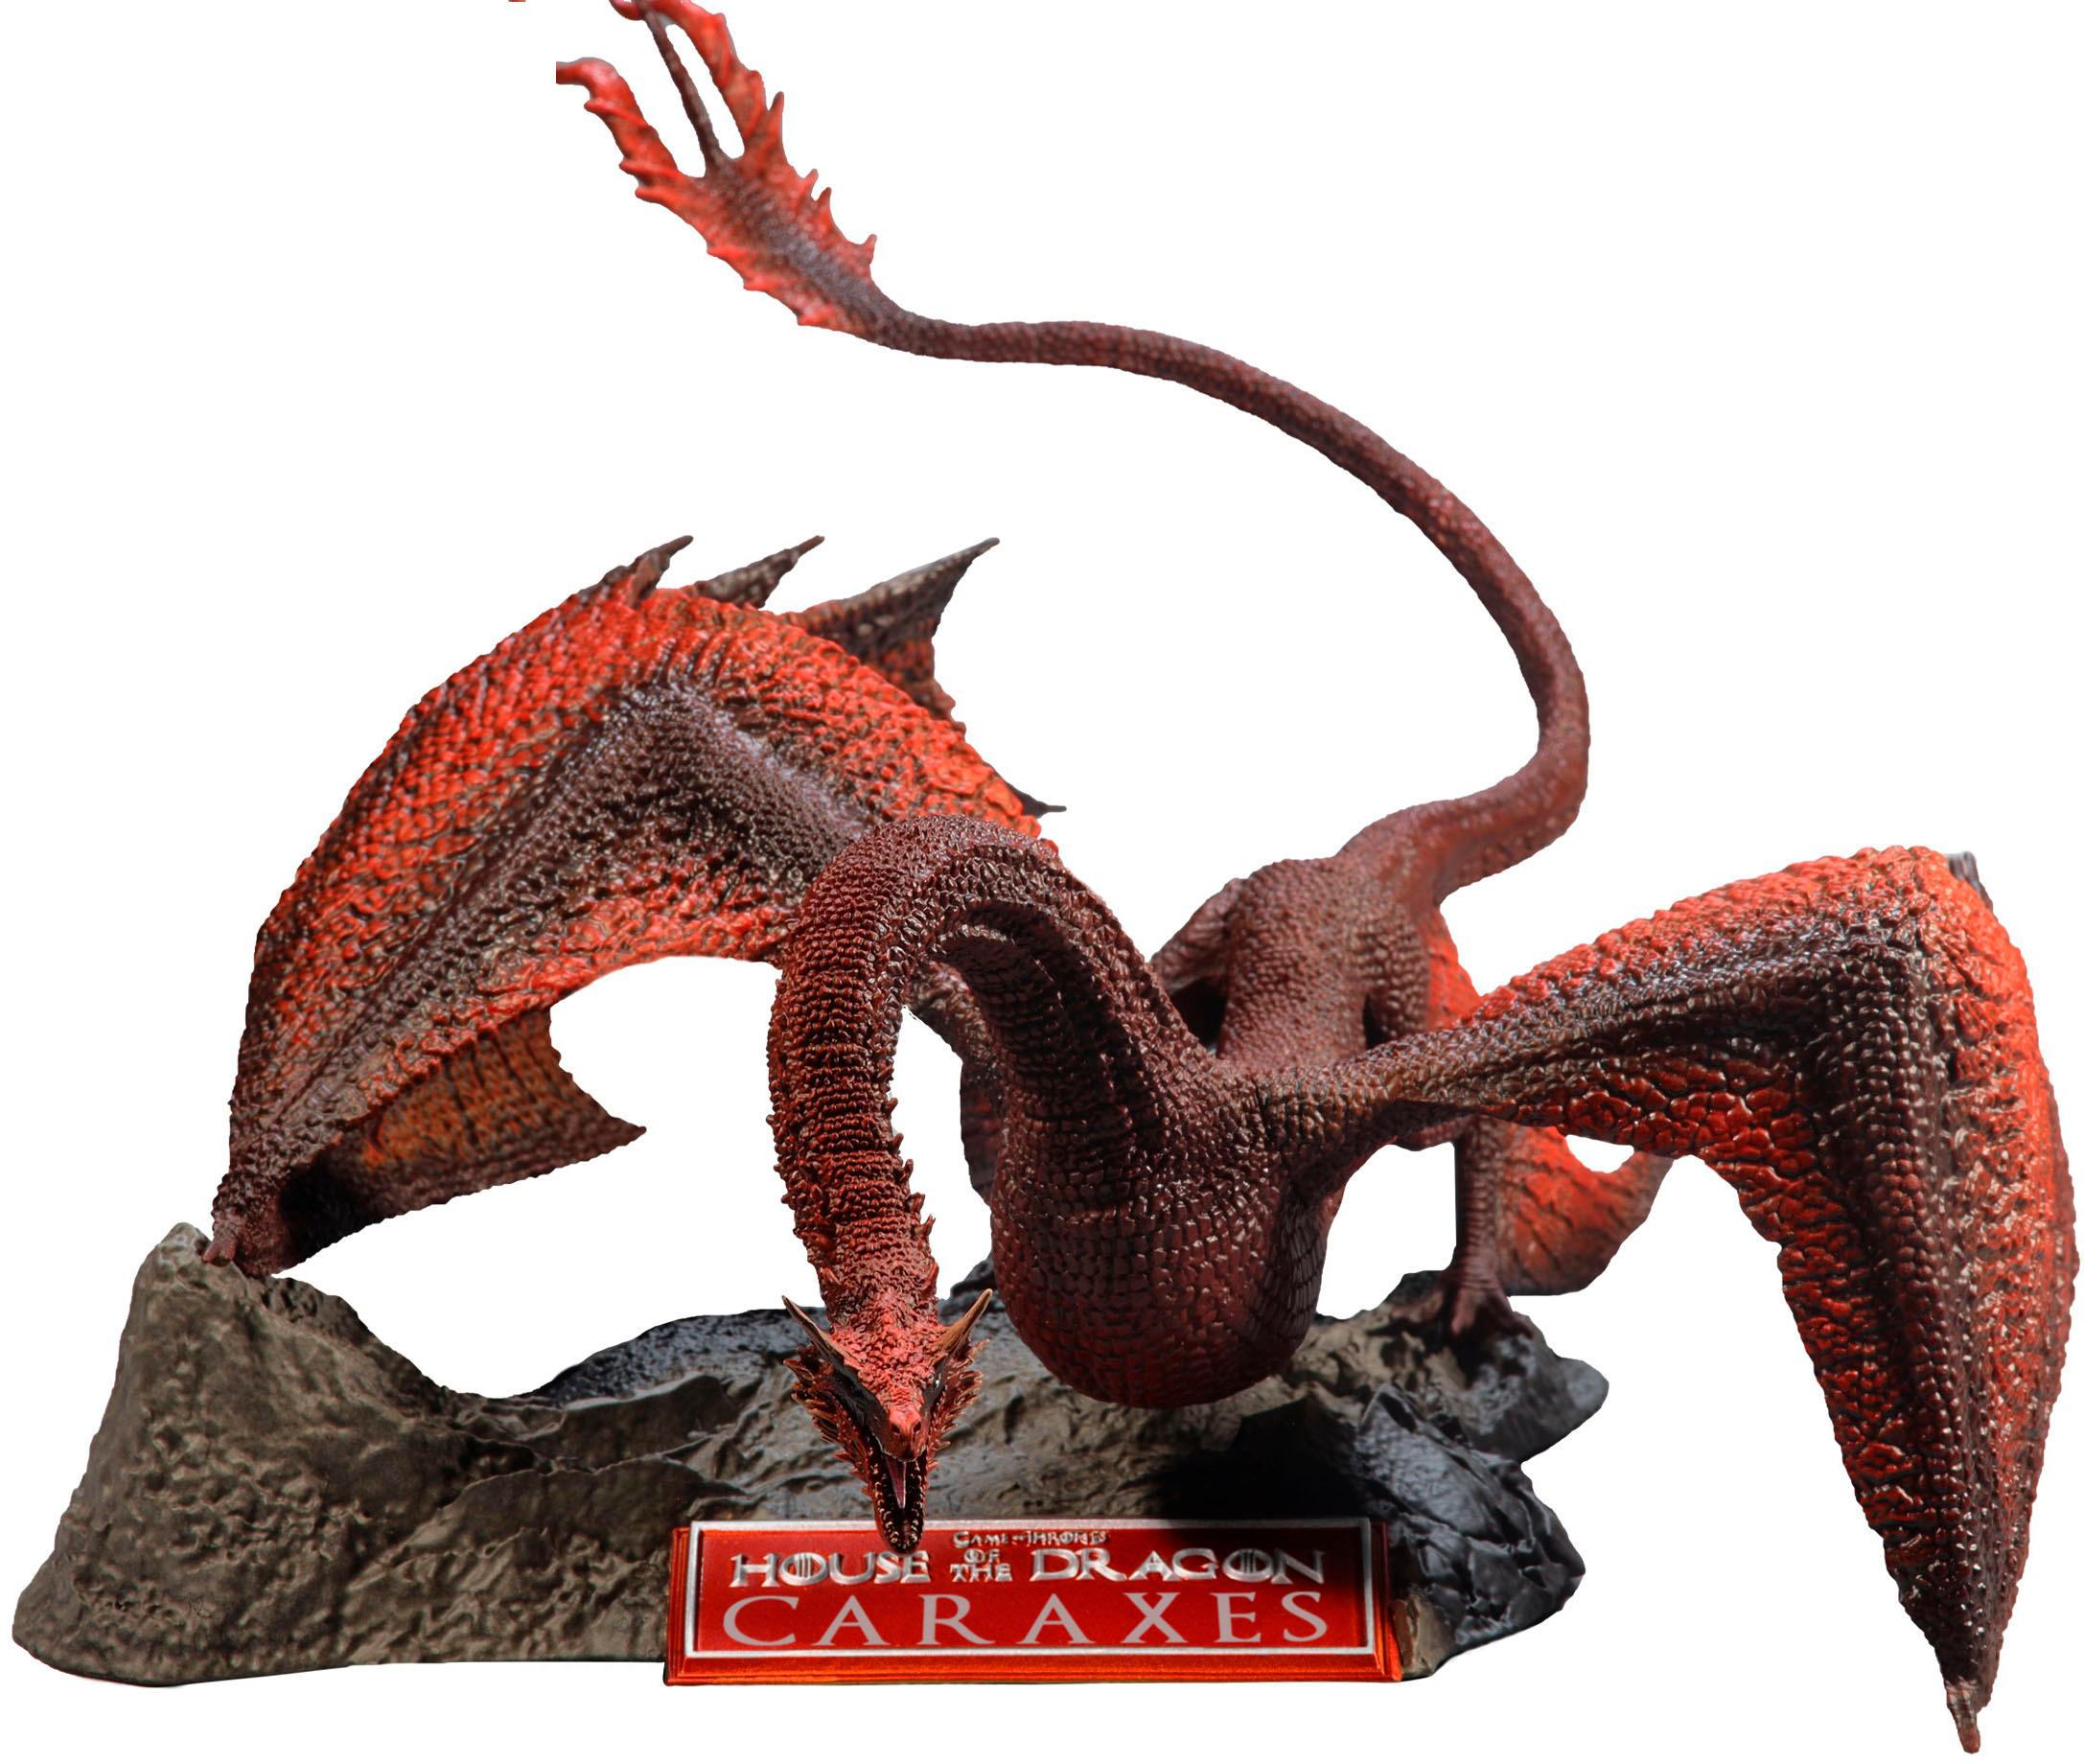 vurdere solo politi McFarlane Toys House of The Dragon Caraxes 13827 - Best Buy